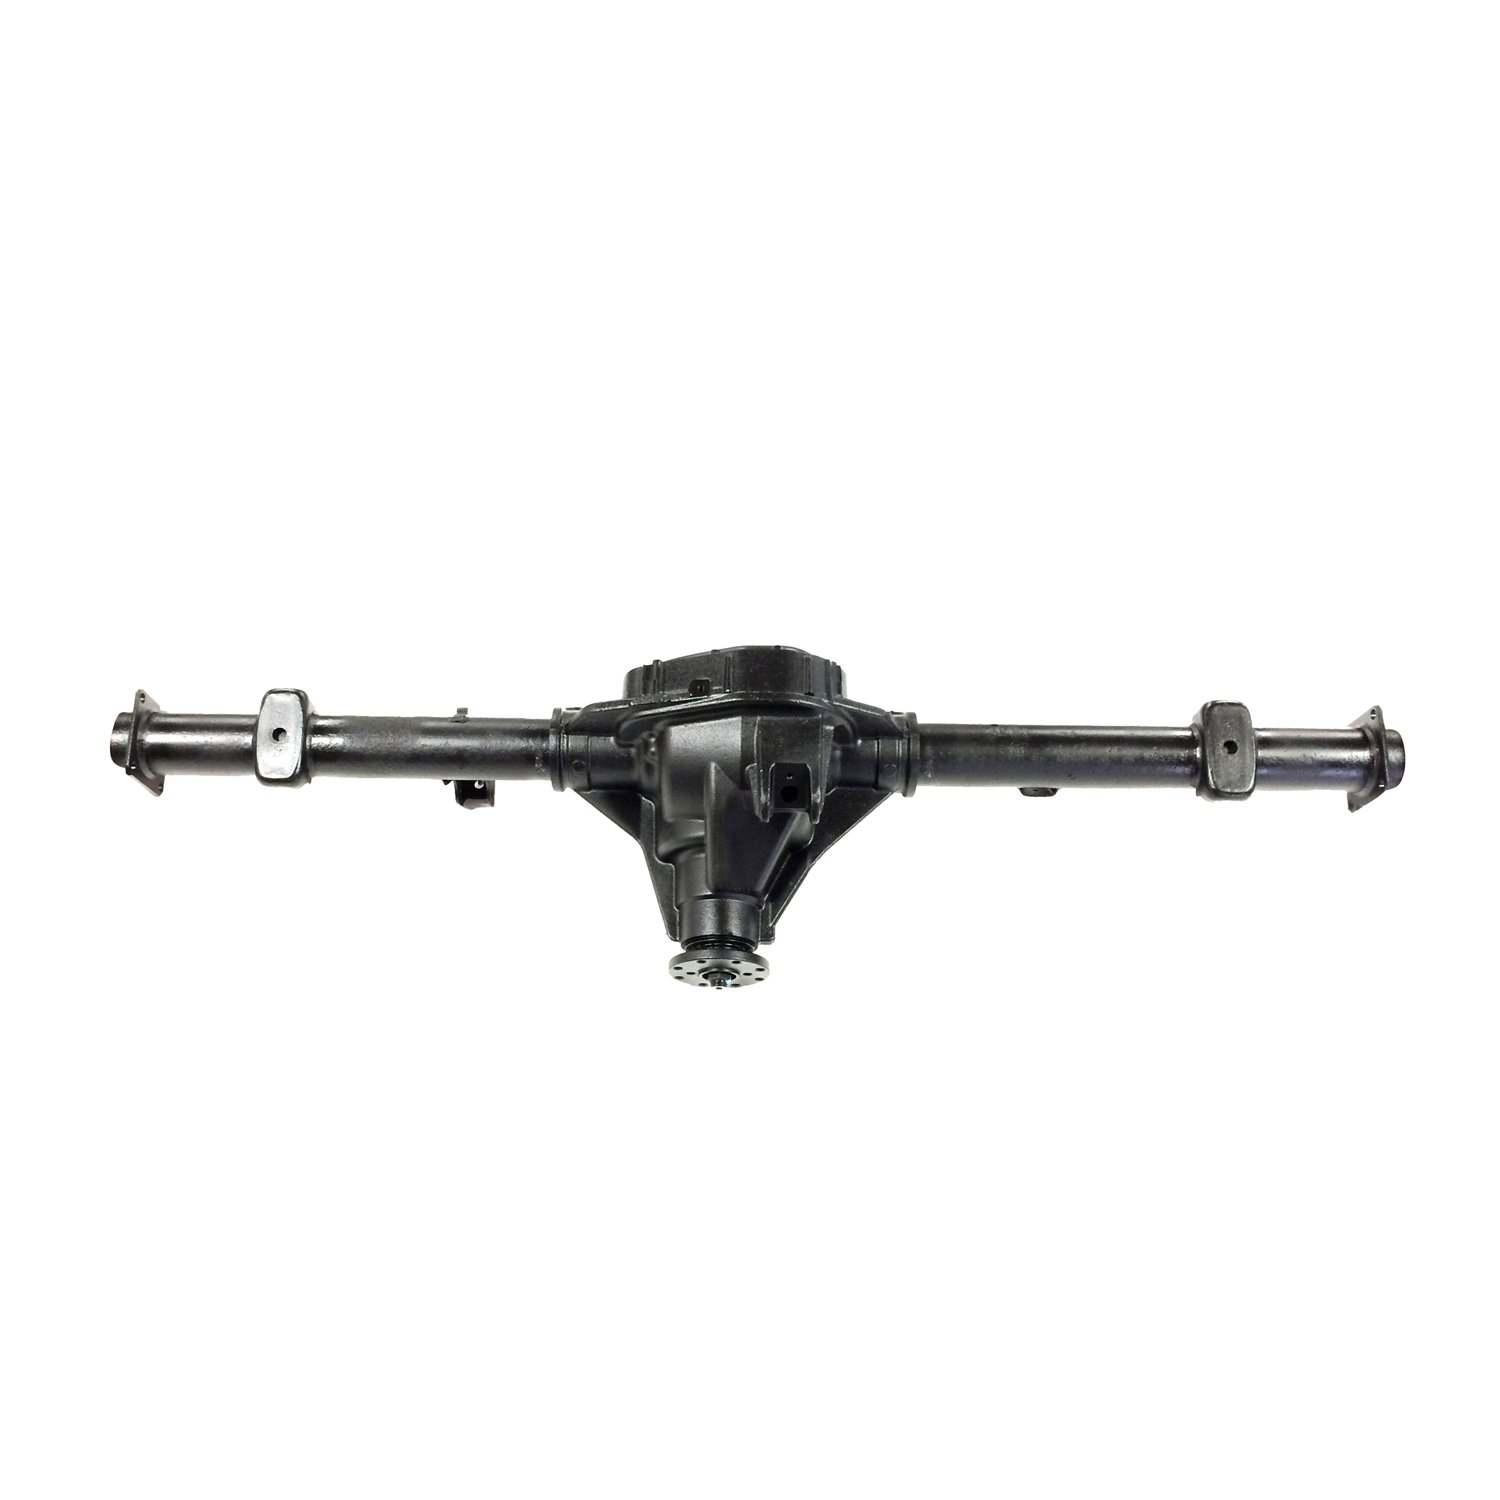 Remanufactured Complete Axle Assembly for 9.75" 04-05 F150 3.55 , Disc Brakes, Posi LSD